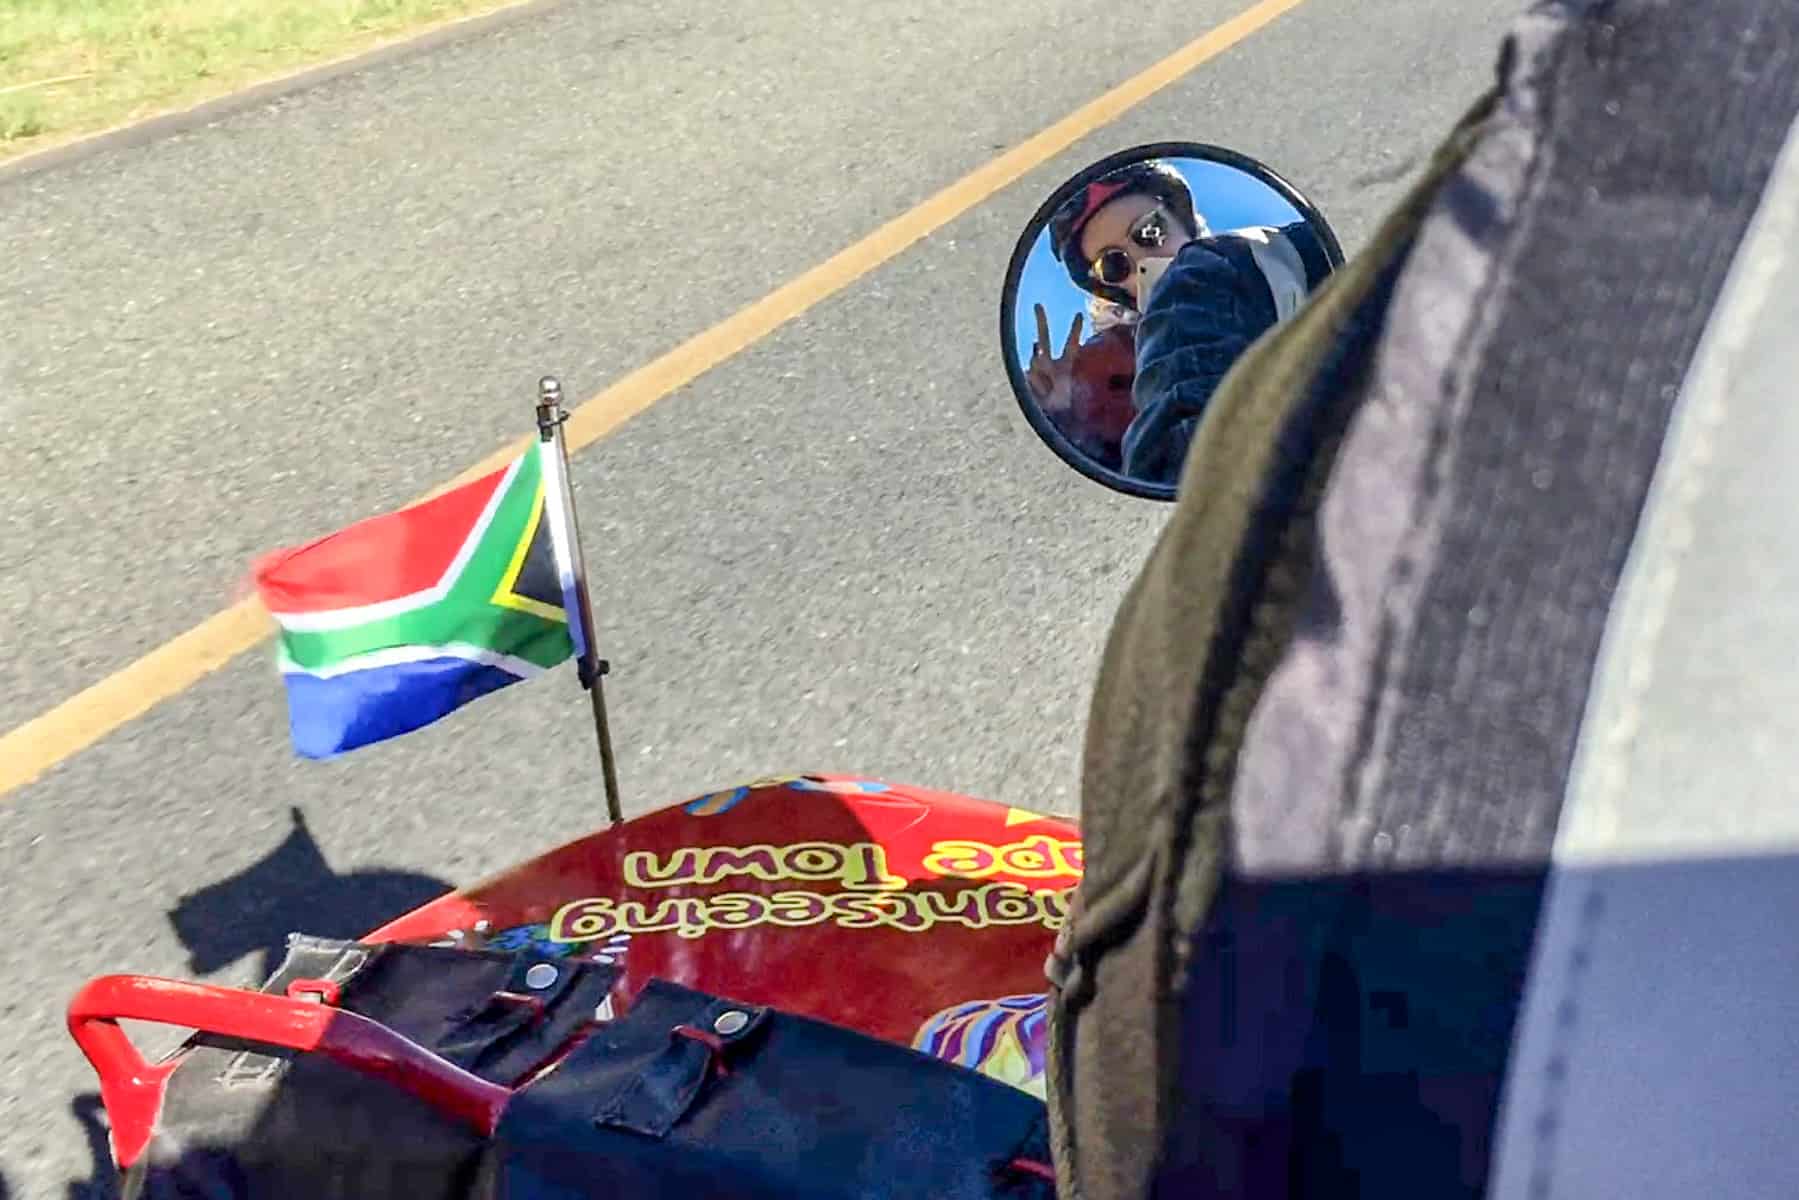 A woman looks into the mirror of a motorbike. Next to her is the red detail of the sidecar reading "Cape Town Sidecars" and a small South African flag waving in the wind.